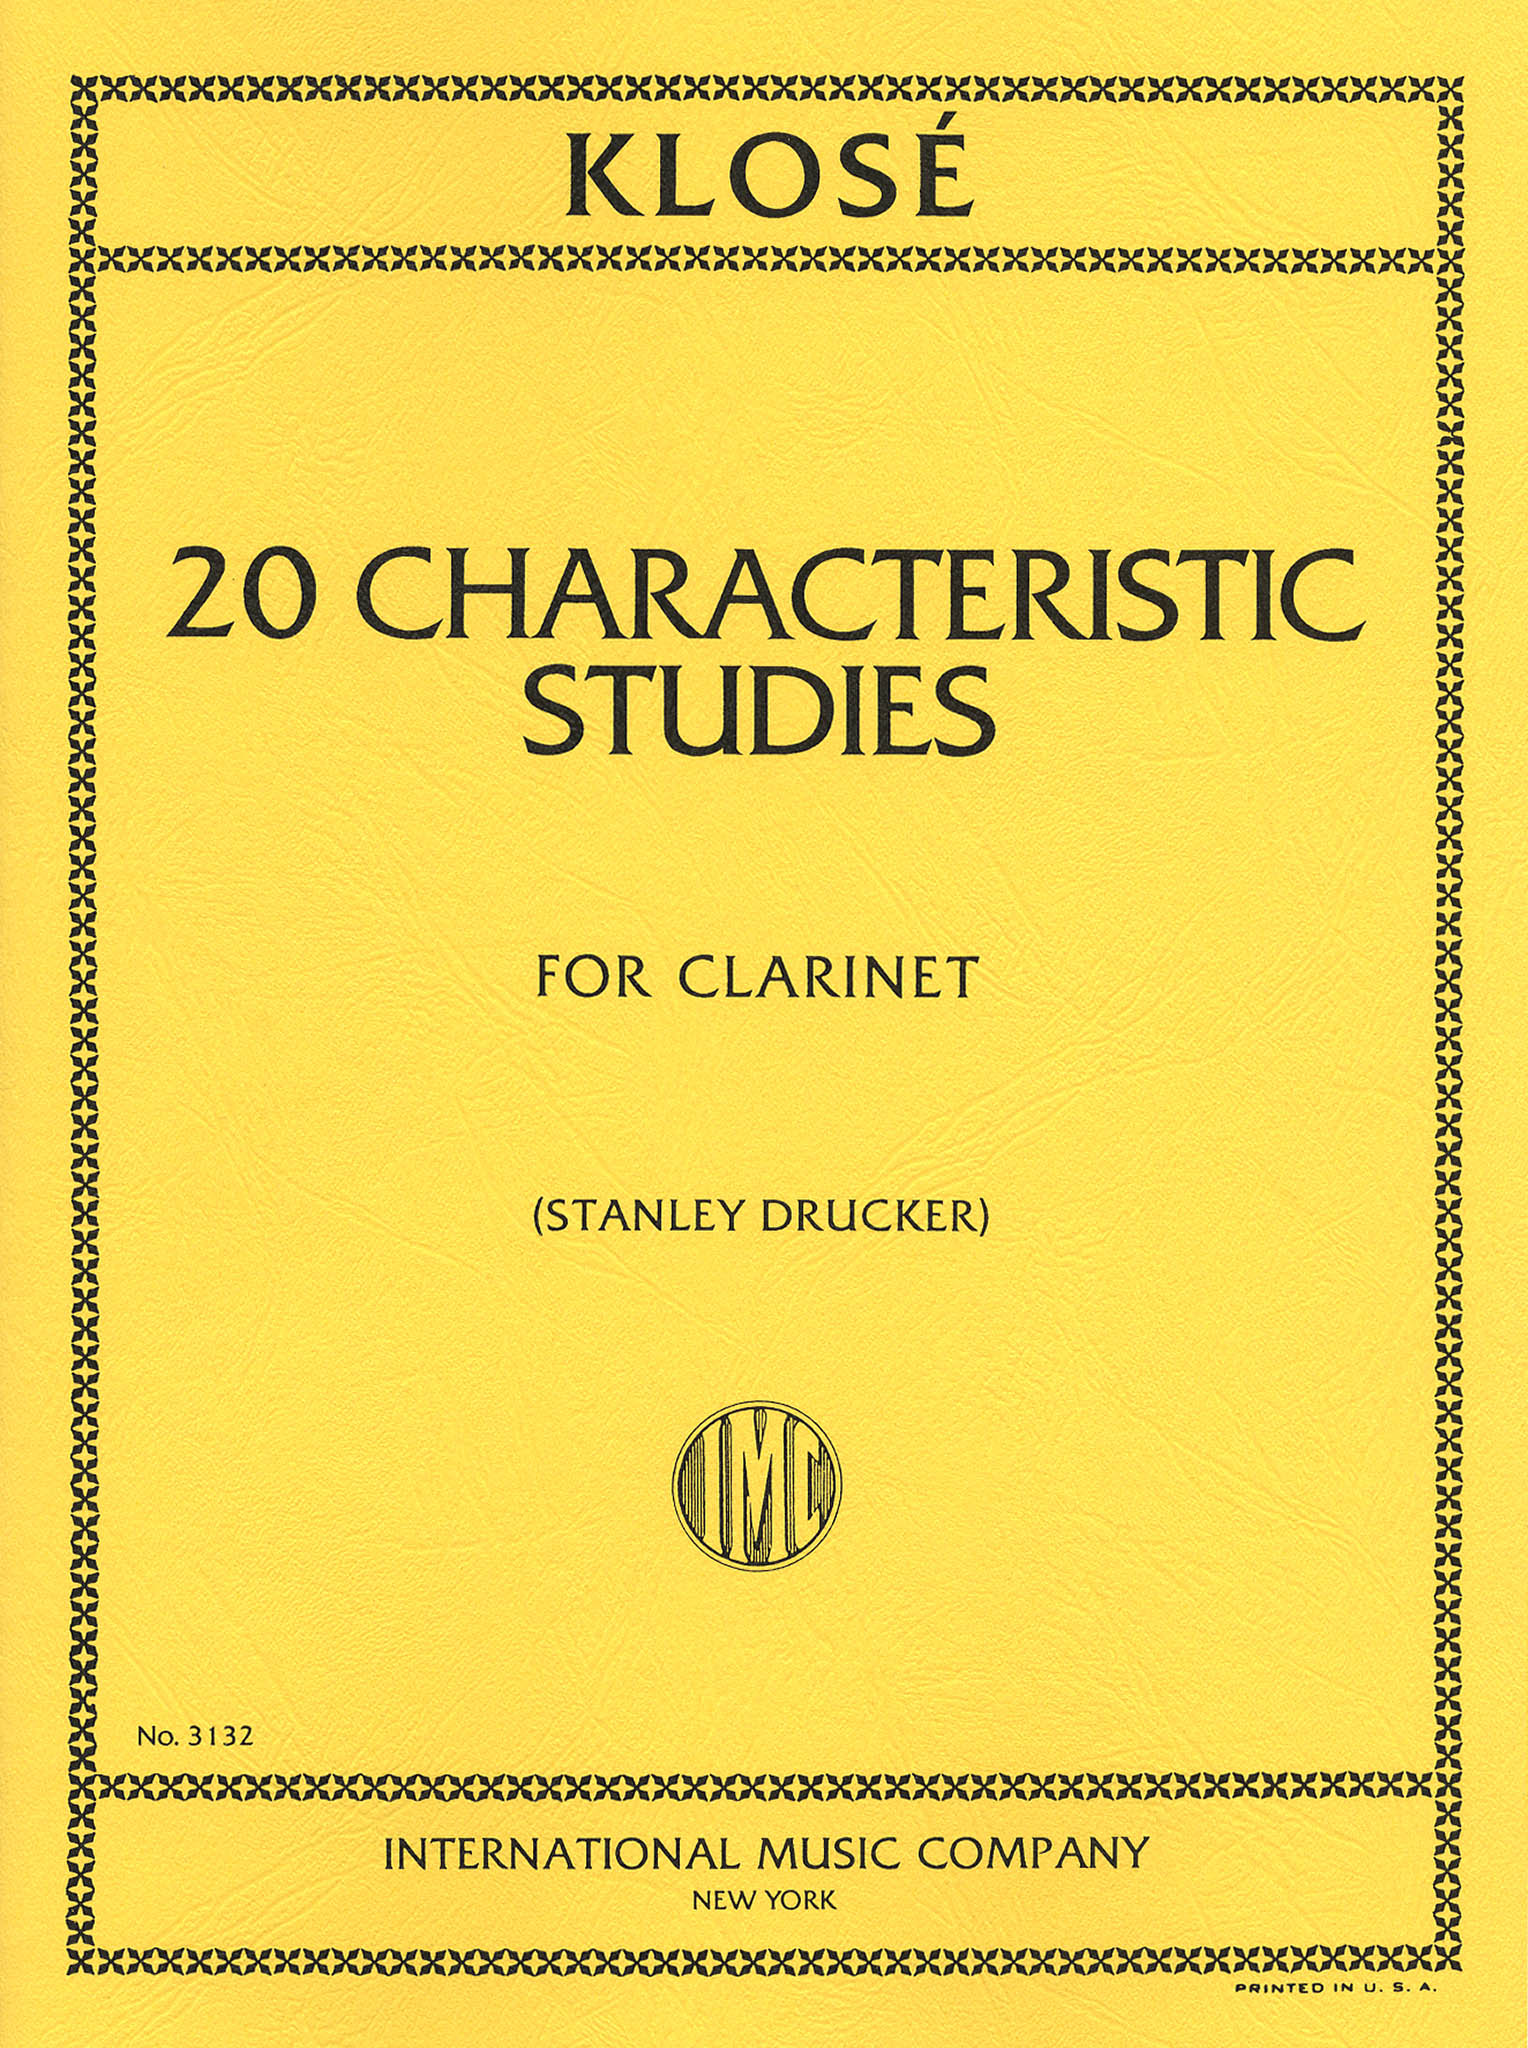 Klosé 20 Characteristic Studies for Clarinet cover